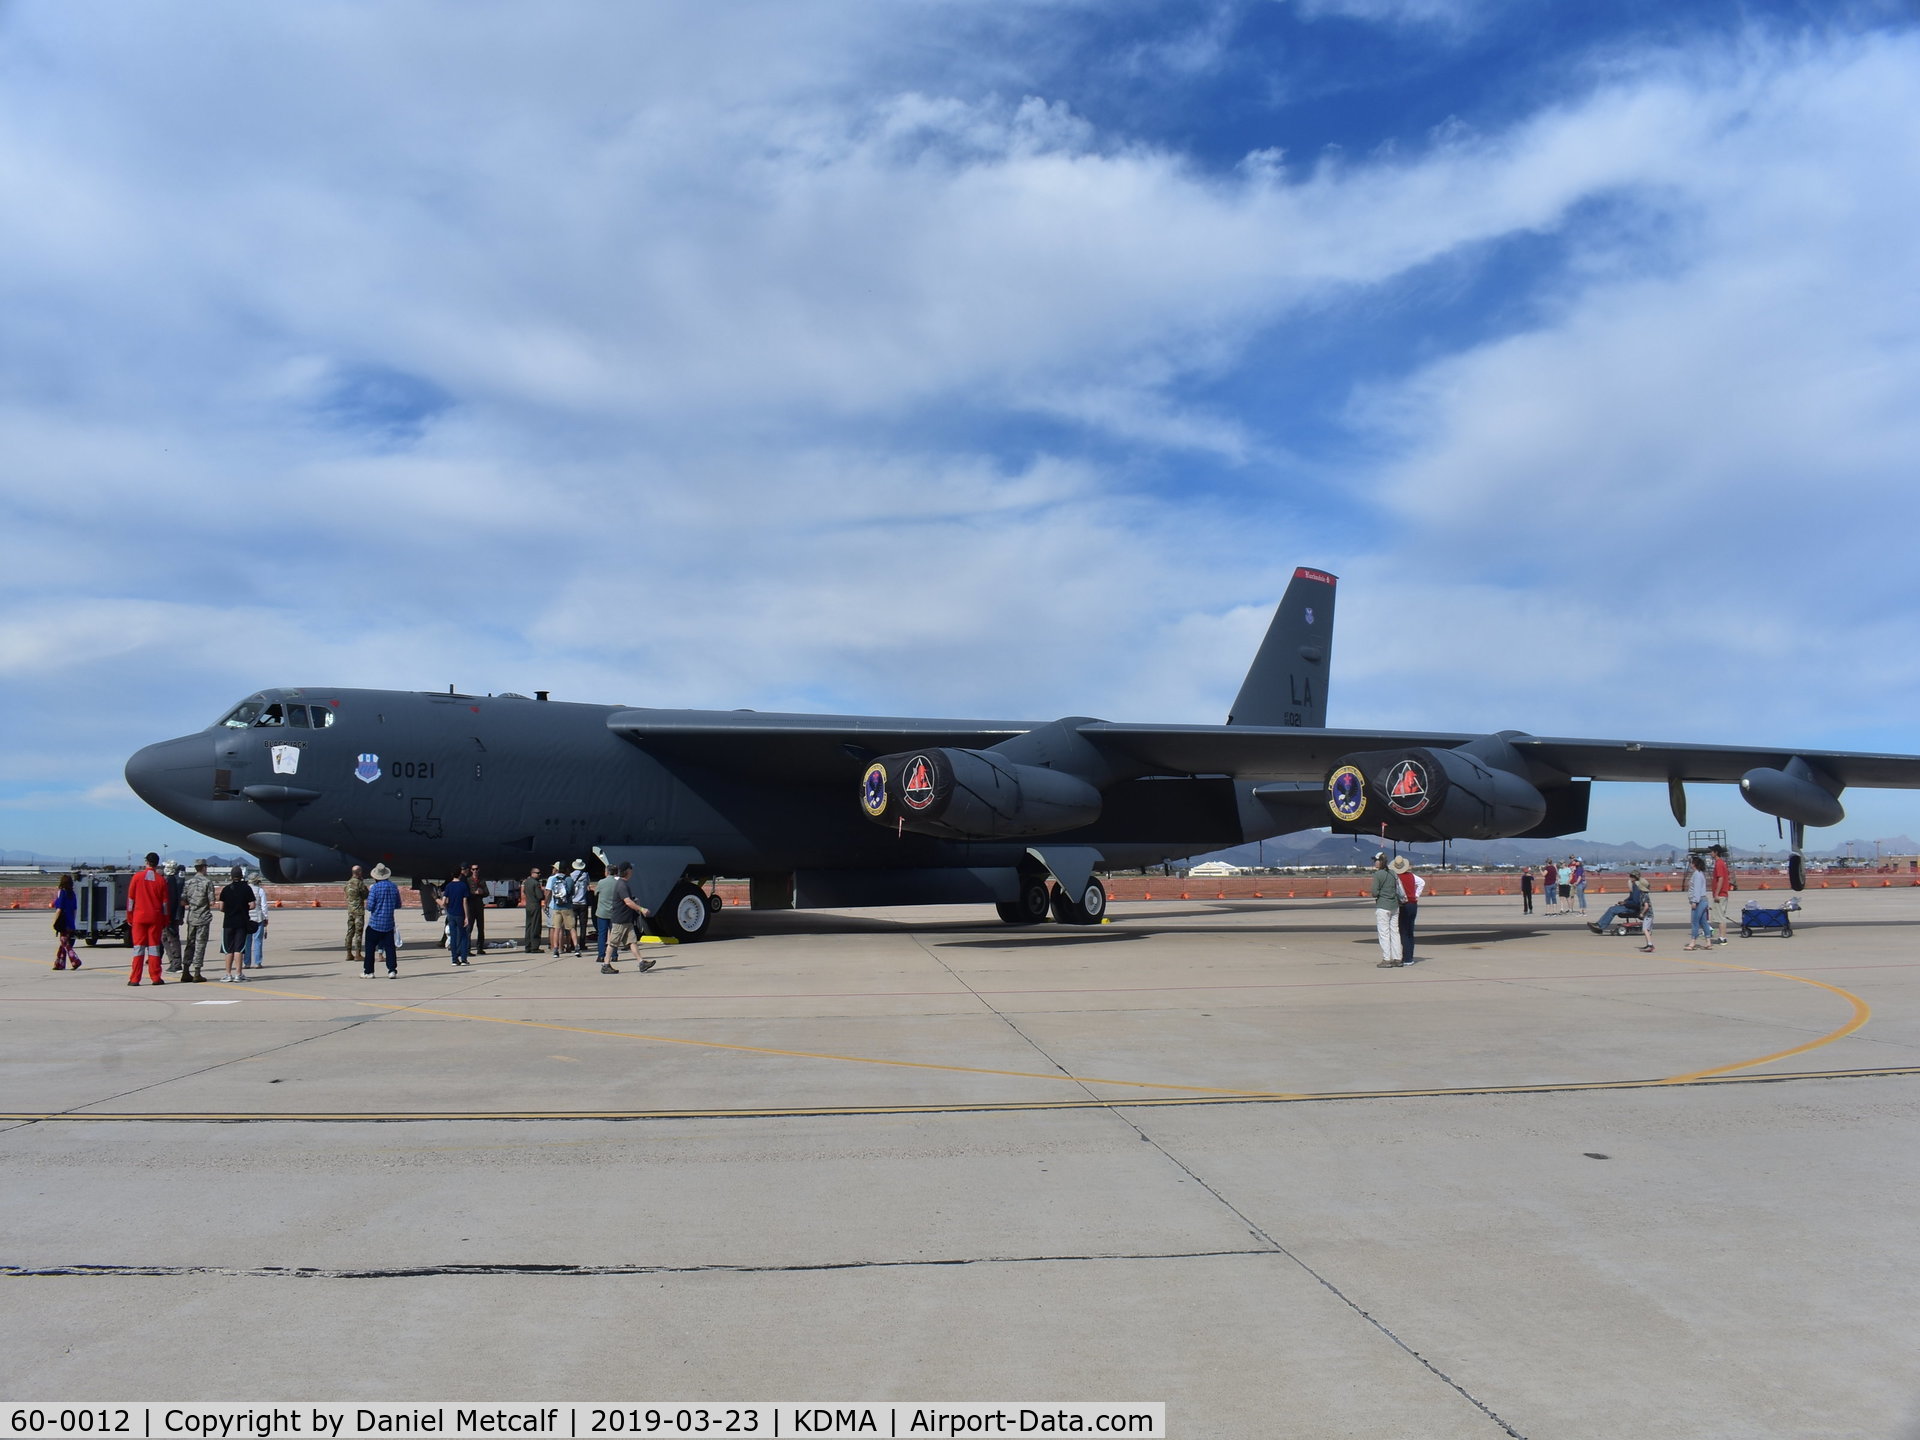 60-0012, 1960 Boeing B-52H Stratofortress C/N 464377, Seen at the Thunder & Lightning Over Arizona Air Show